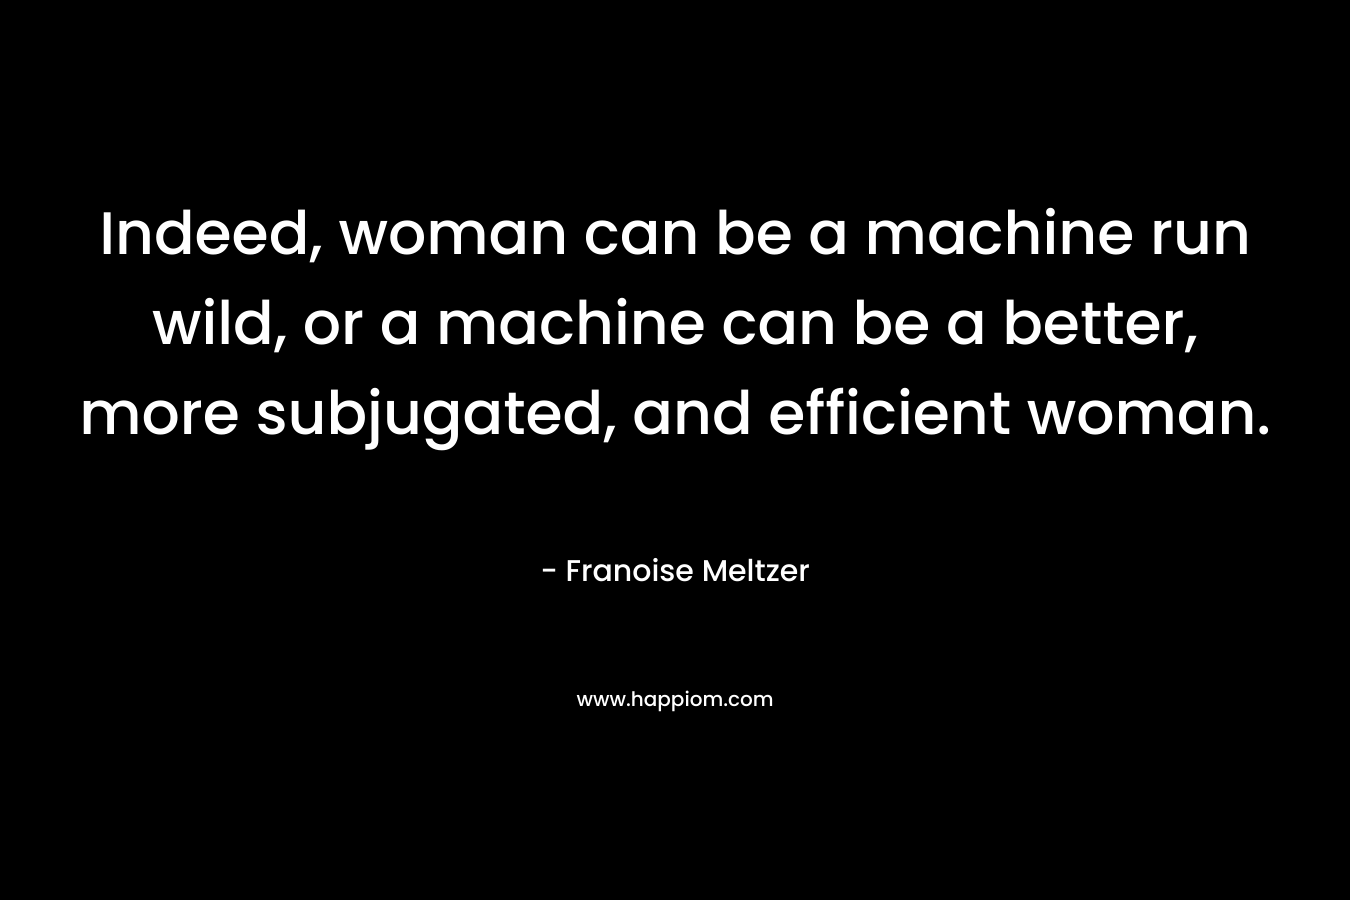 Indeed, woman can be a machine run wild, or a machine can be a better, more subjugated, and efficient woman.